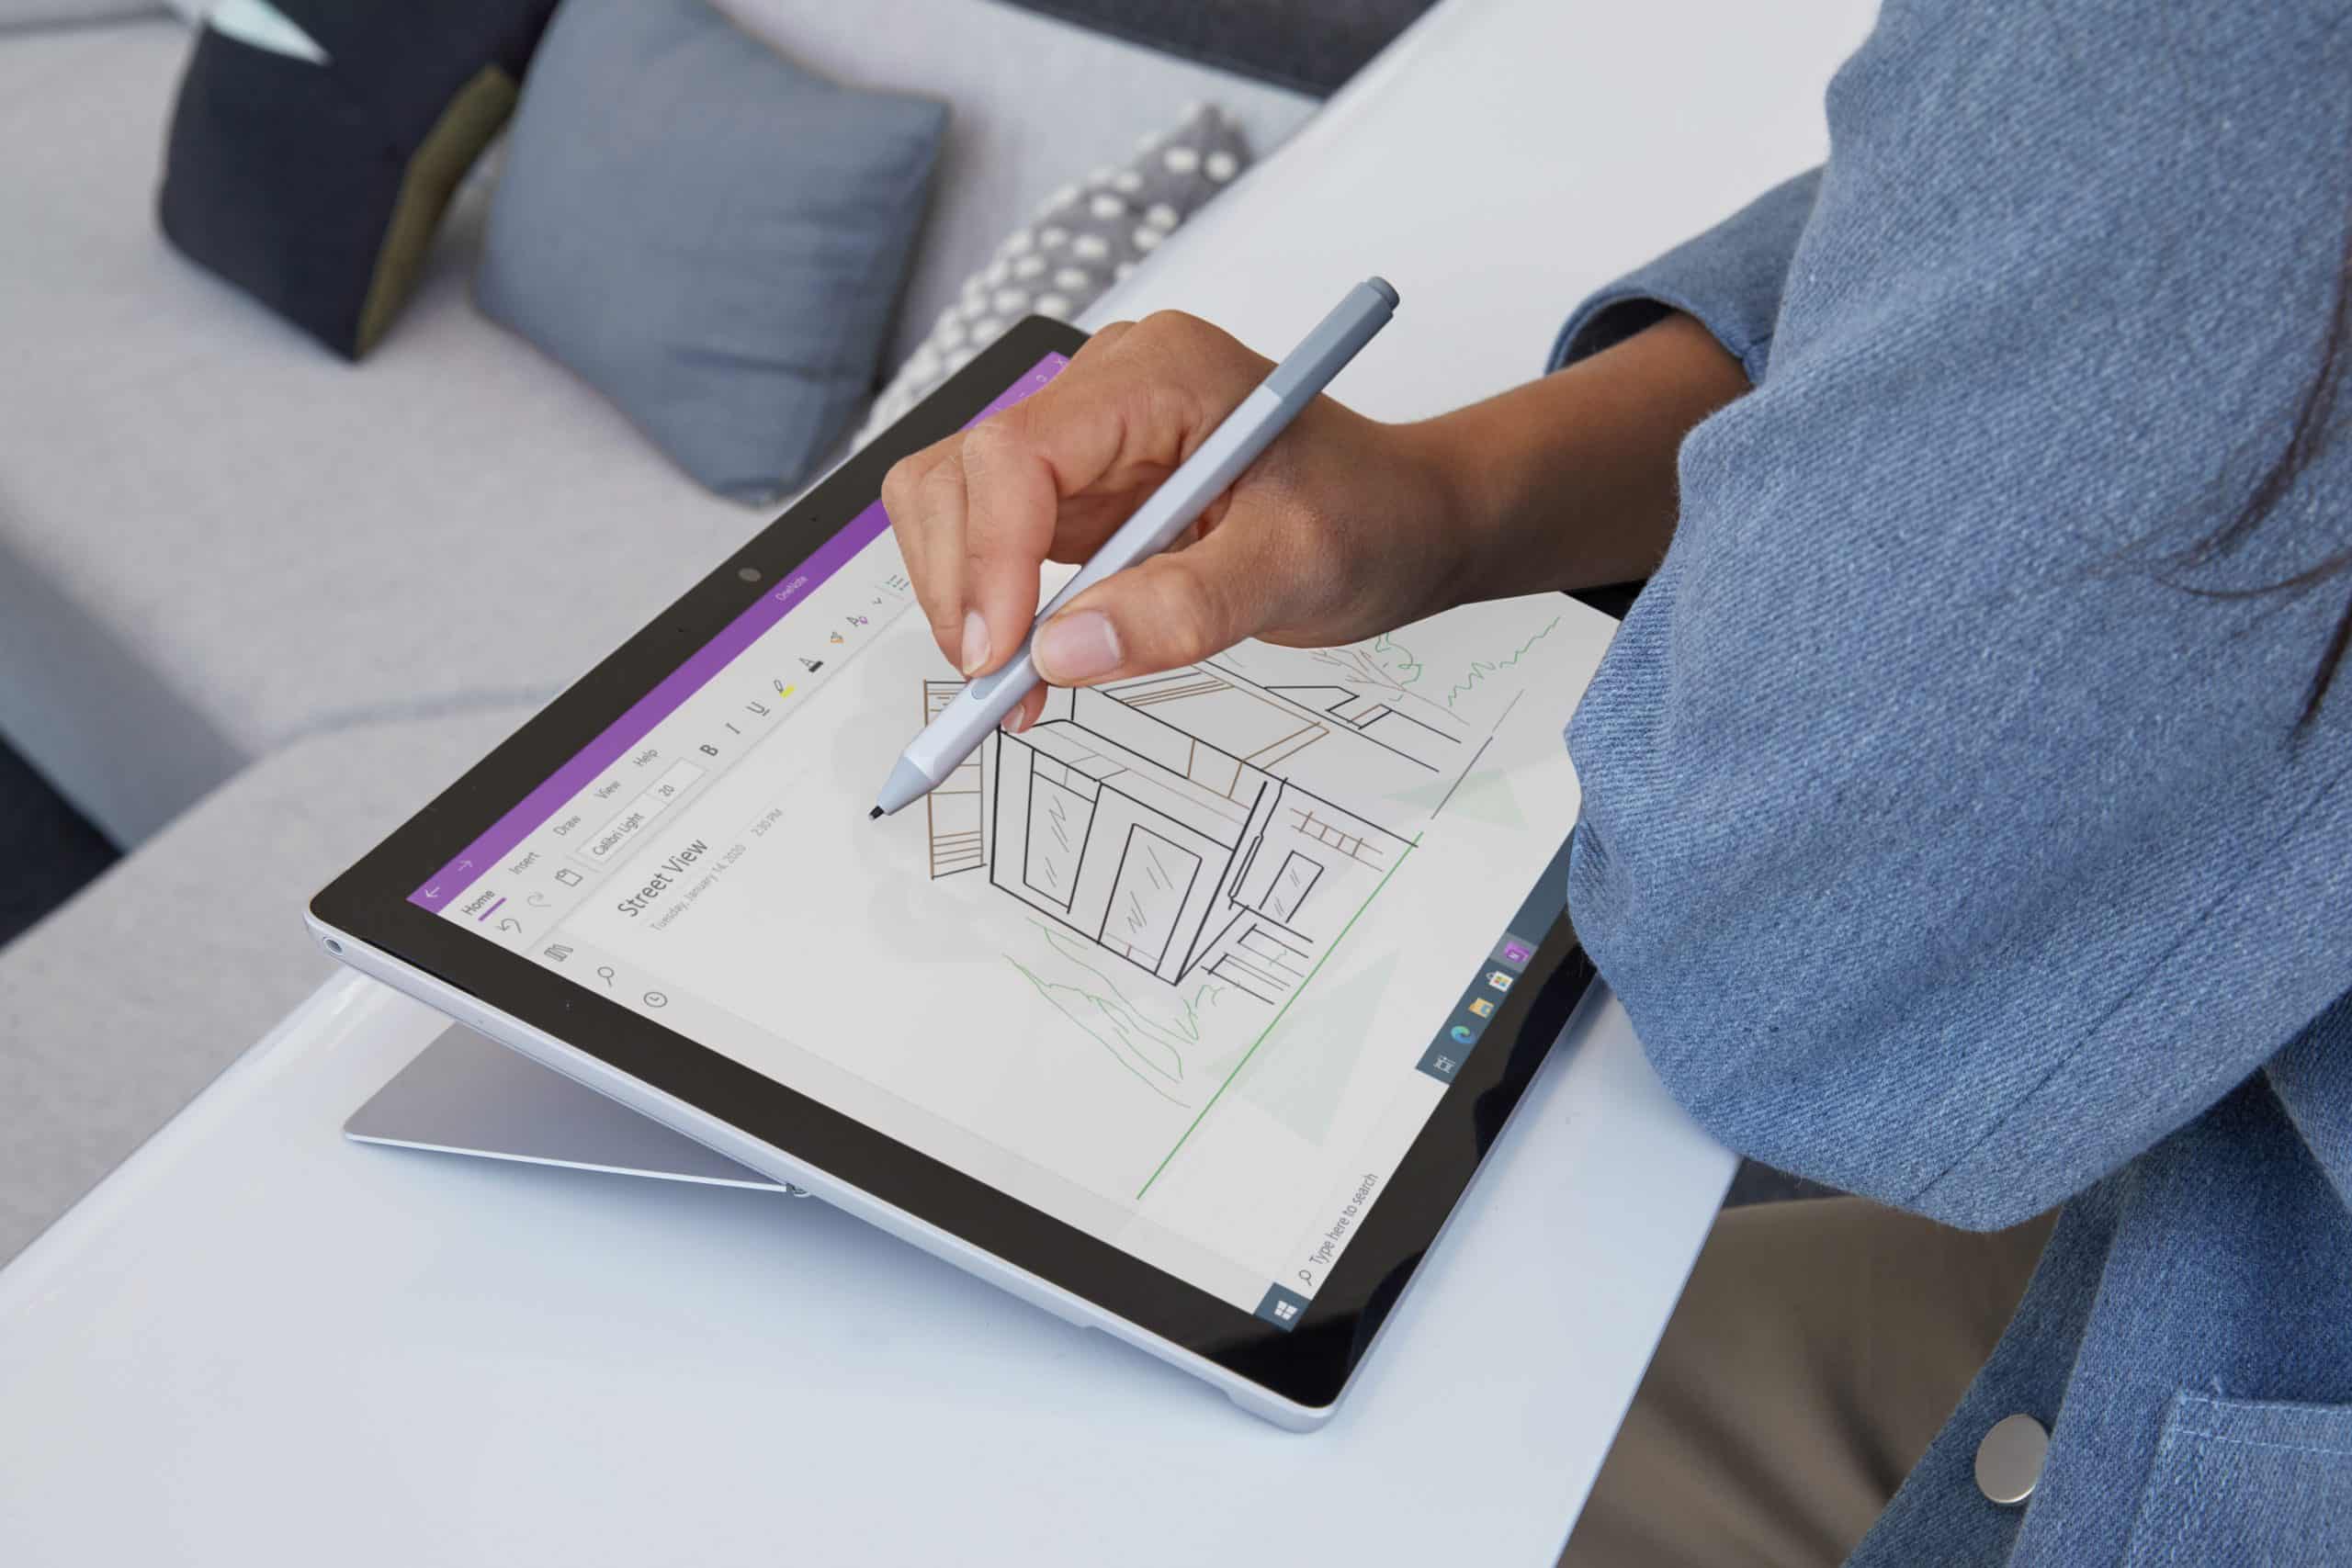 Microsoft Surface pro 7+ for business